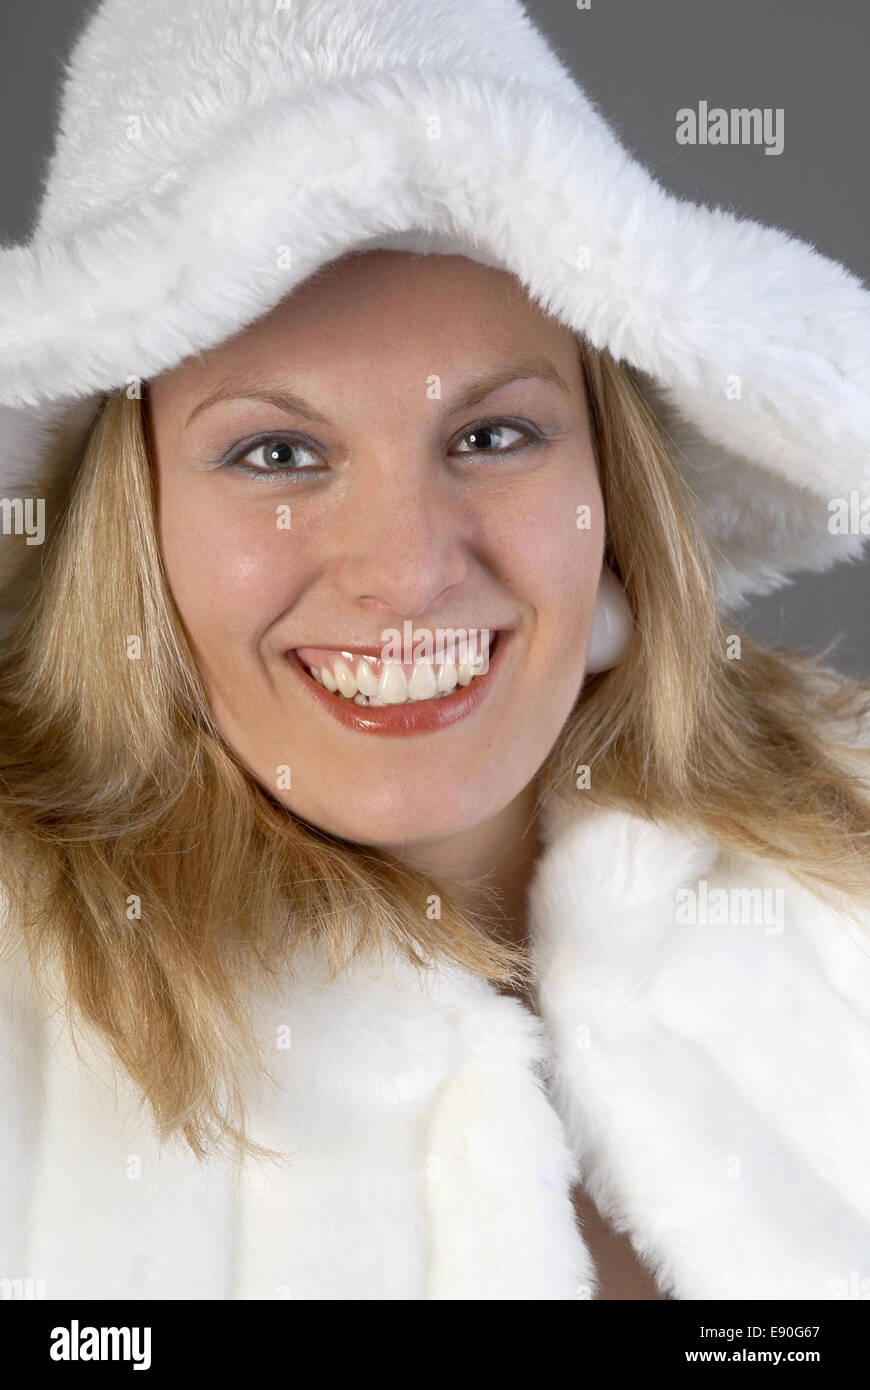 Carnival disguise Stock Photo